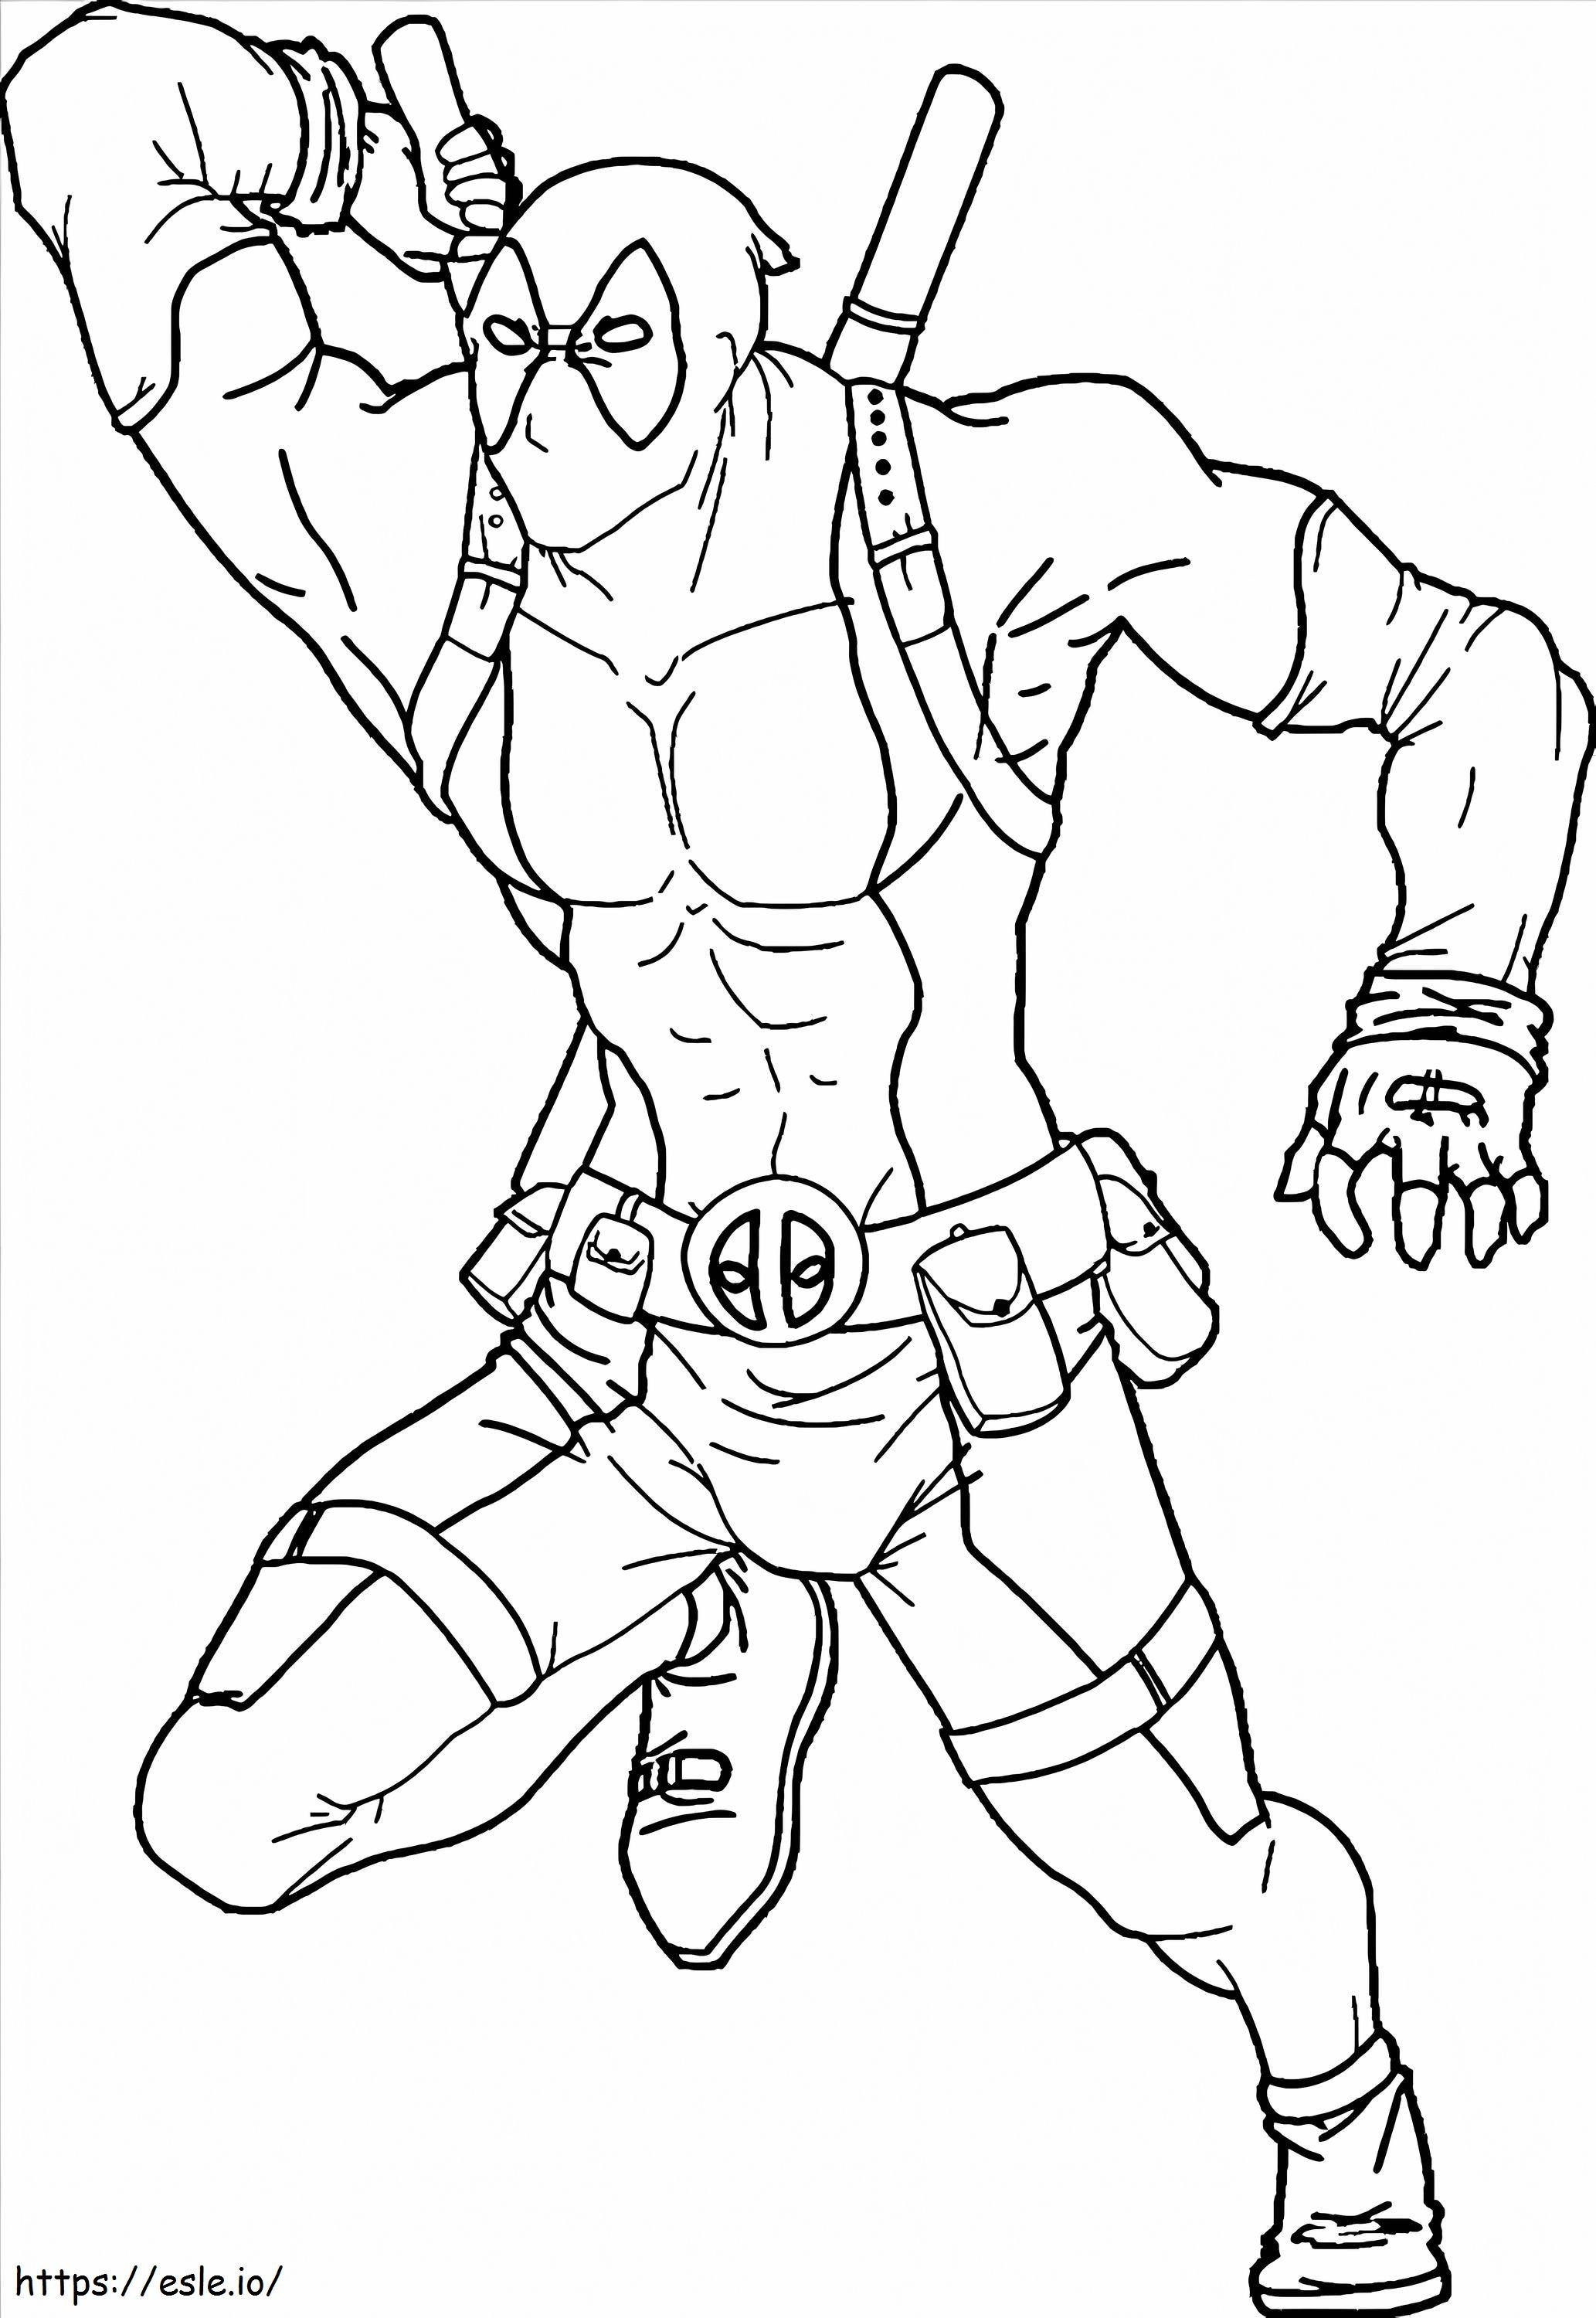 Increible Deadpool coloring page